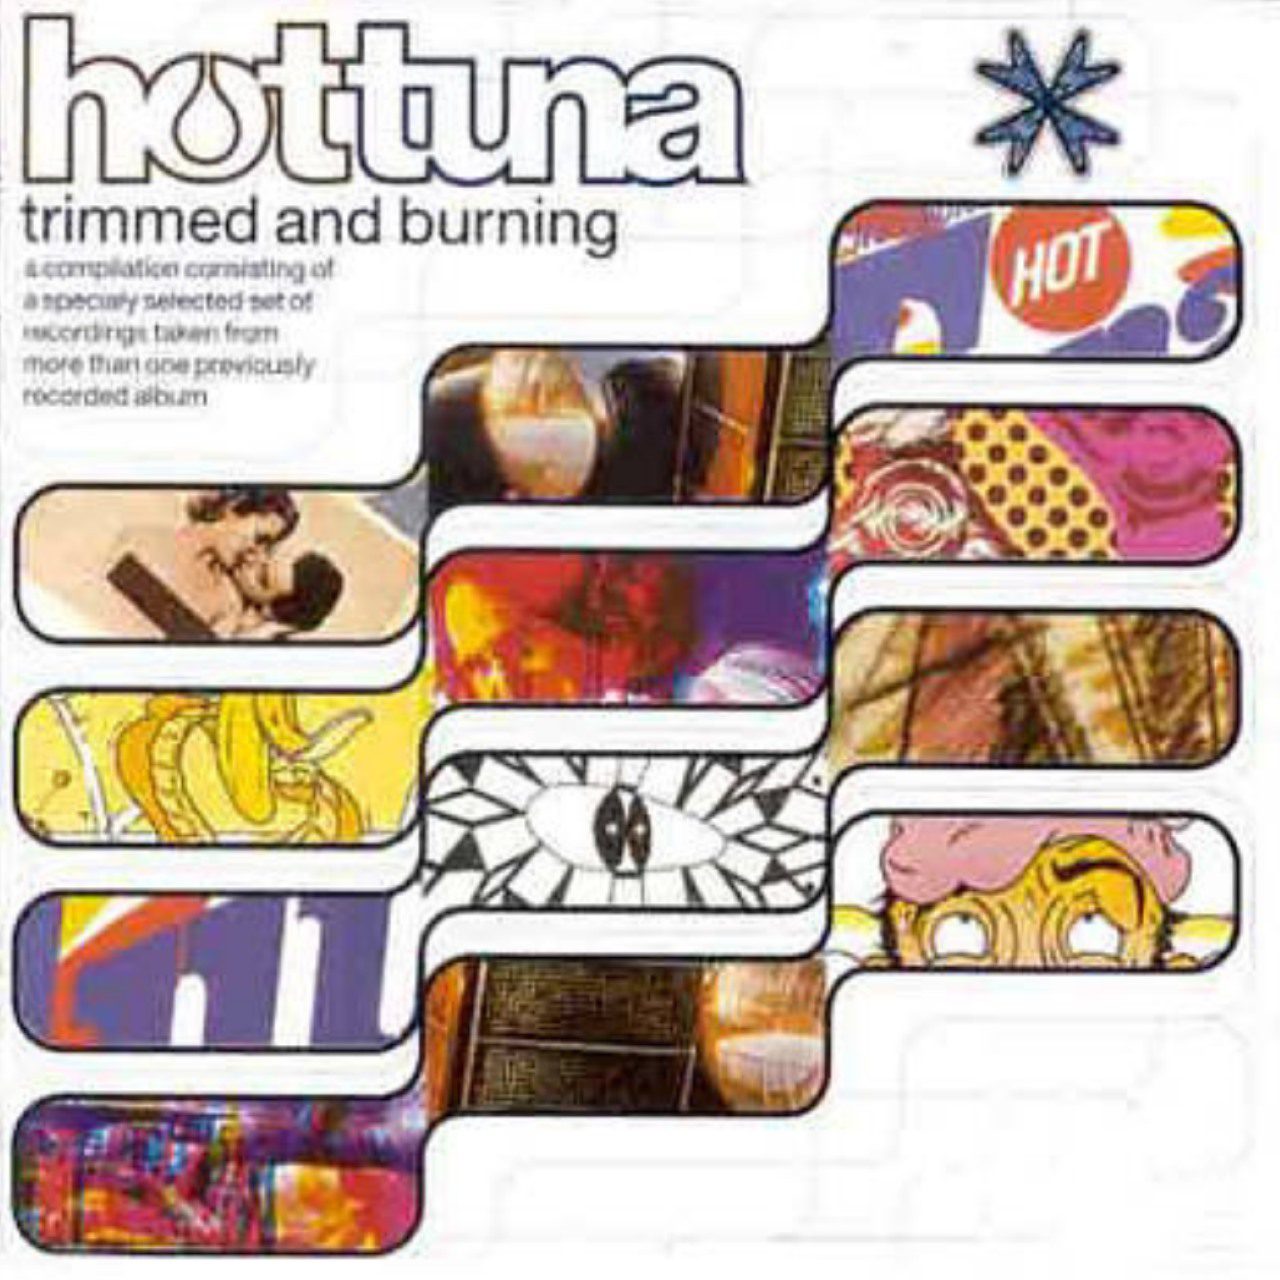 Hot Tuna – Trimmed And Burning cover album